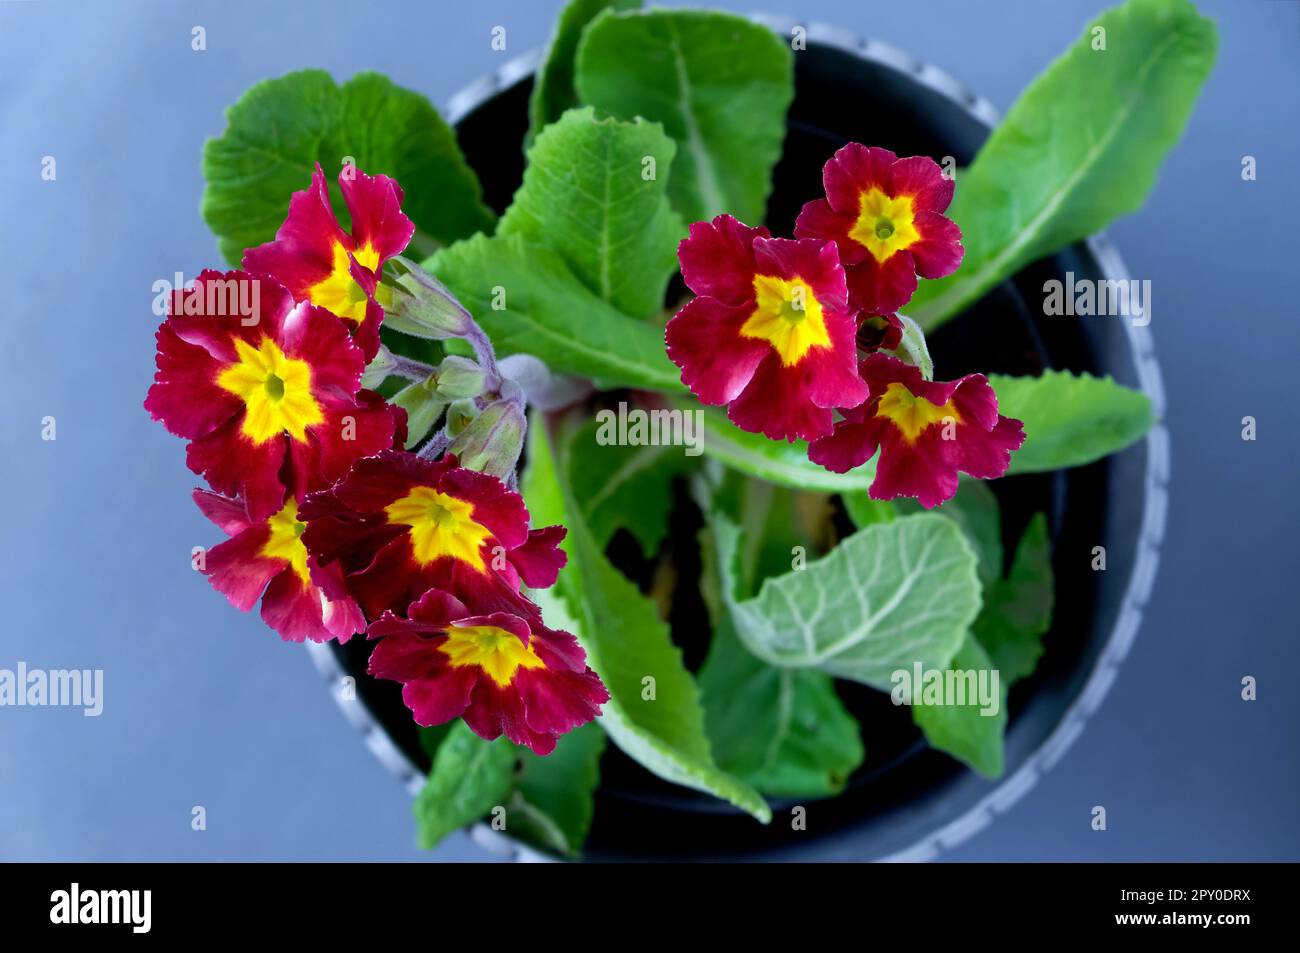 Primula elatior,Primrose,red-yellow flower petals,in full bloom against a light background close up,top view Stock Photo